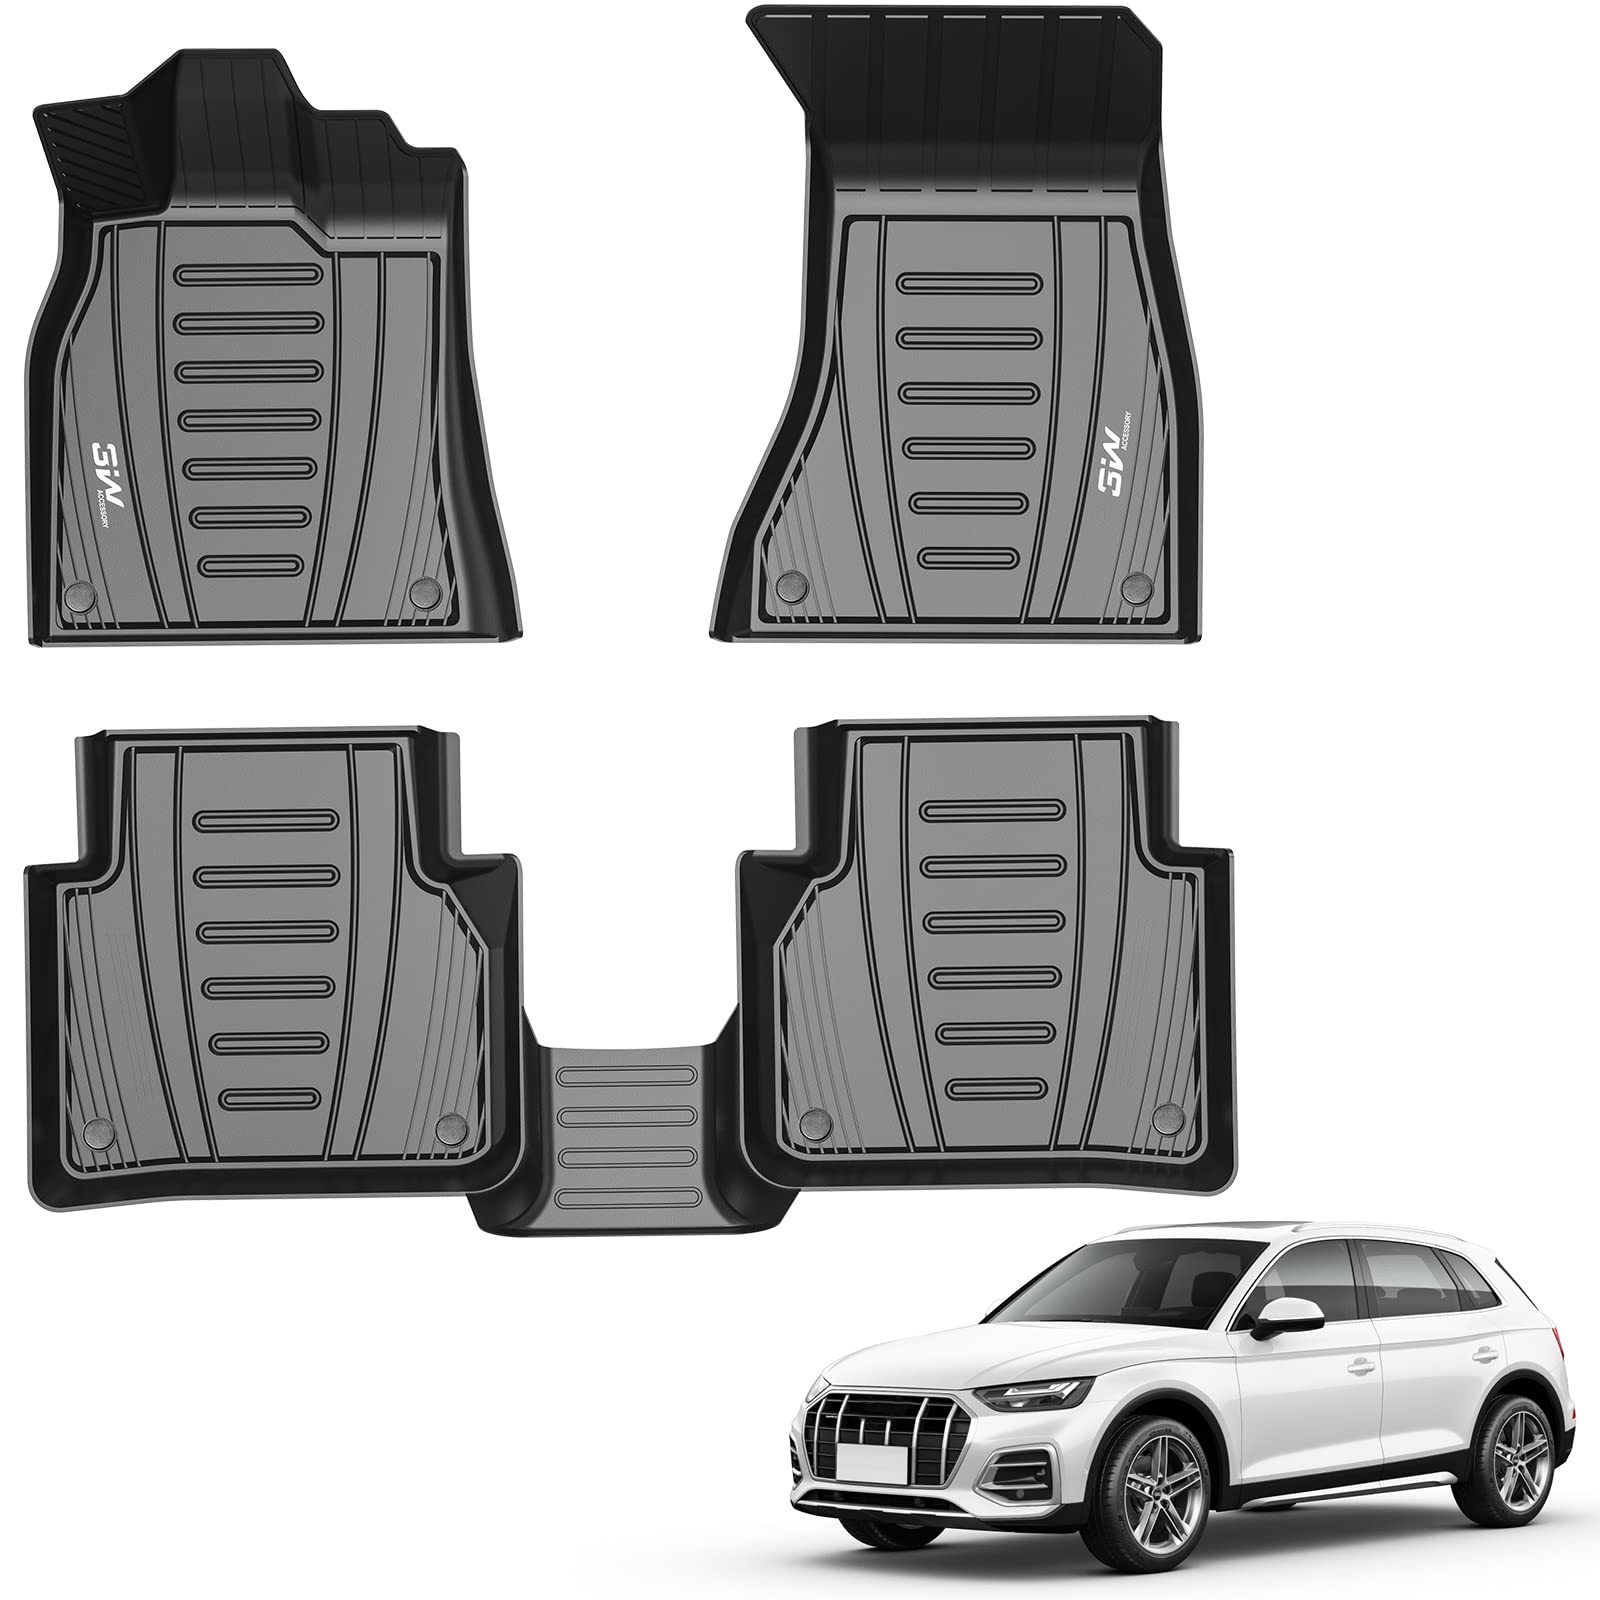 3W Audi Q5/SQ5 2018-2024 Custom Floor Mats TPE Material & All-Weather Protection Vehicles & Parts 3Wliners 2018-2024 Q5 2018-2024 1st&2nd Row Mats